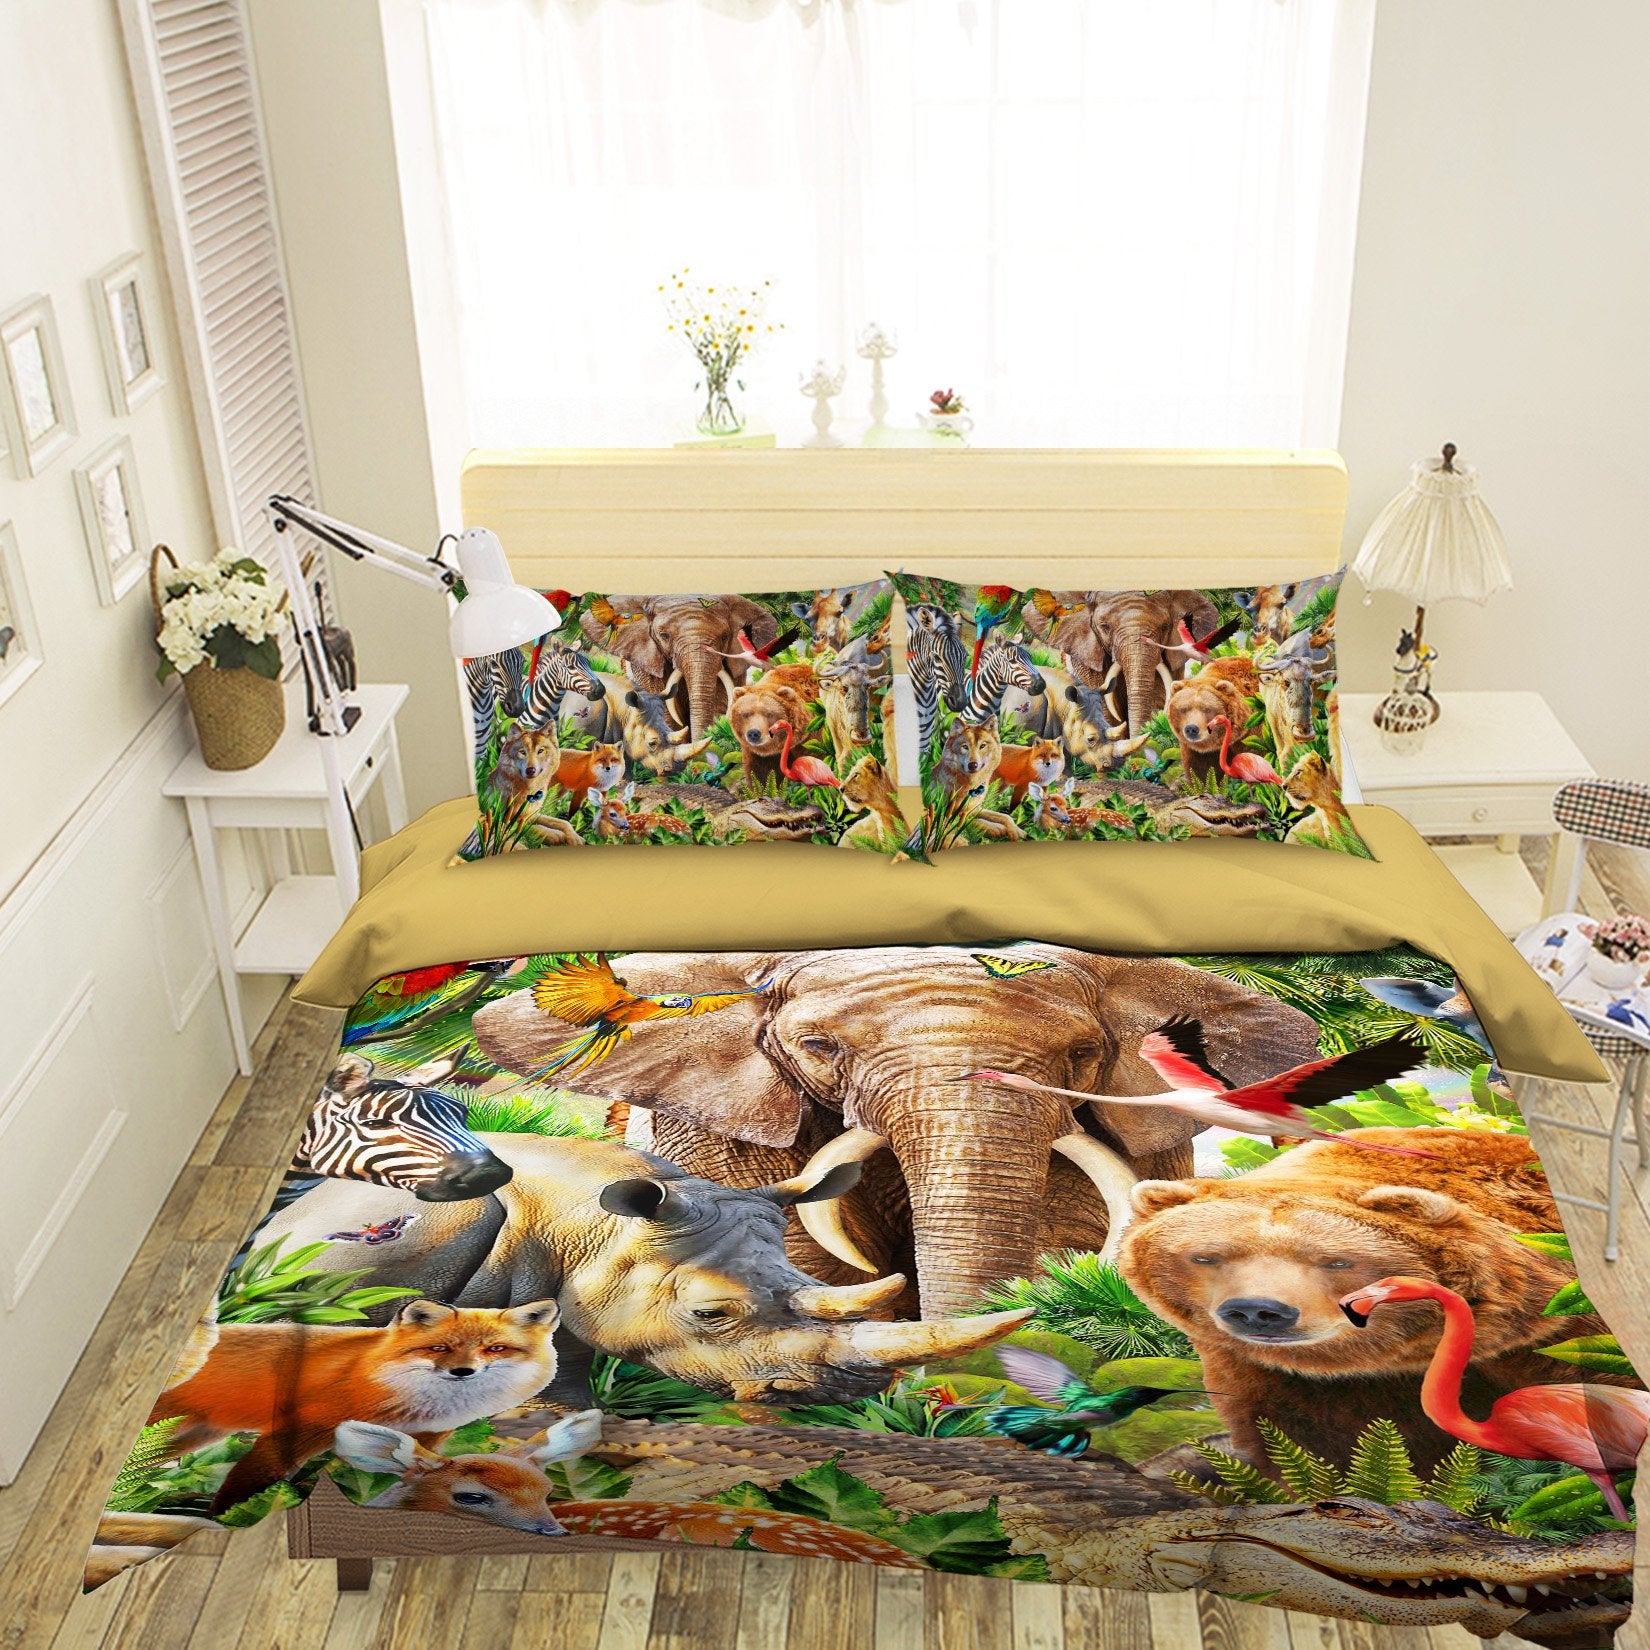 3D Animal World 2129 Adrian Chesterman Bedding Bed Pillowcases Quilt Quiet Covers AJ Creativity Home 